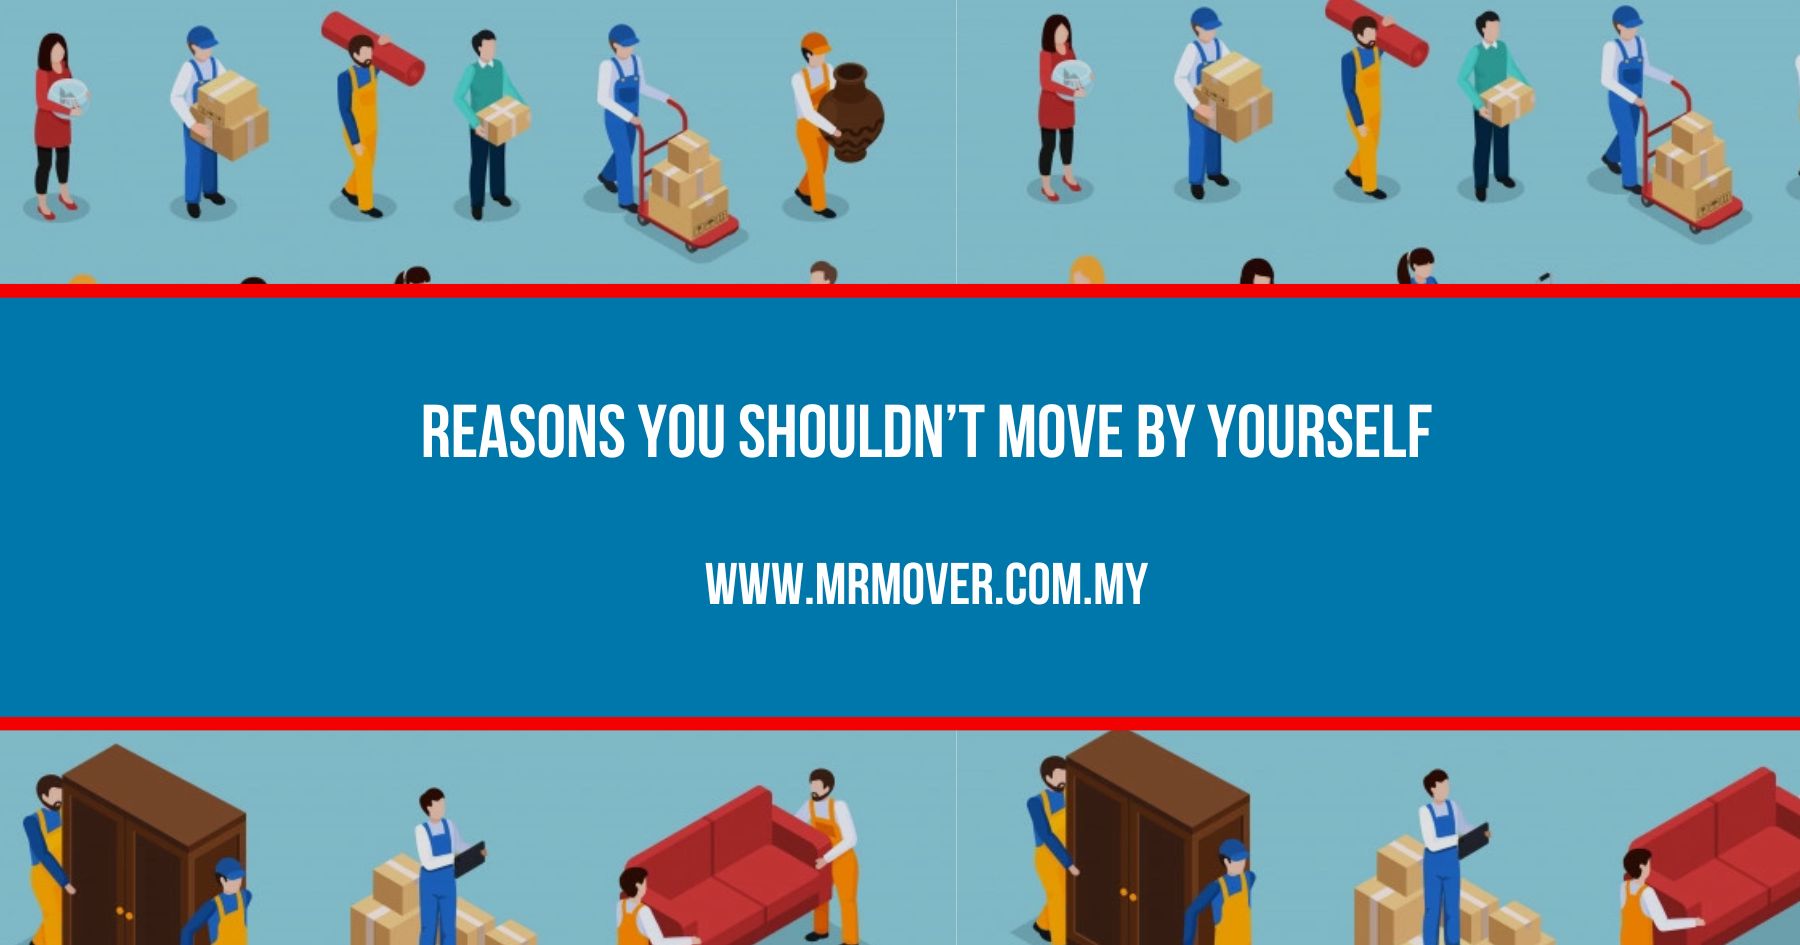 Reasons You Shouldn’t Move by Yourself